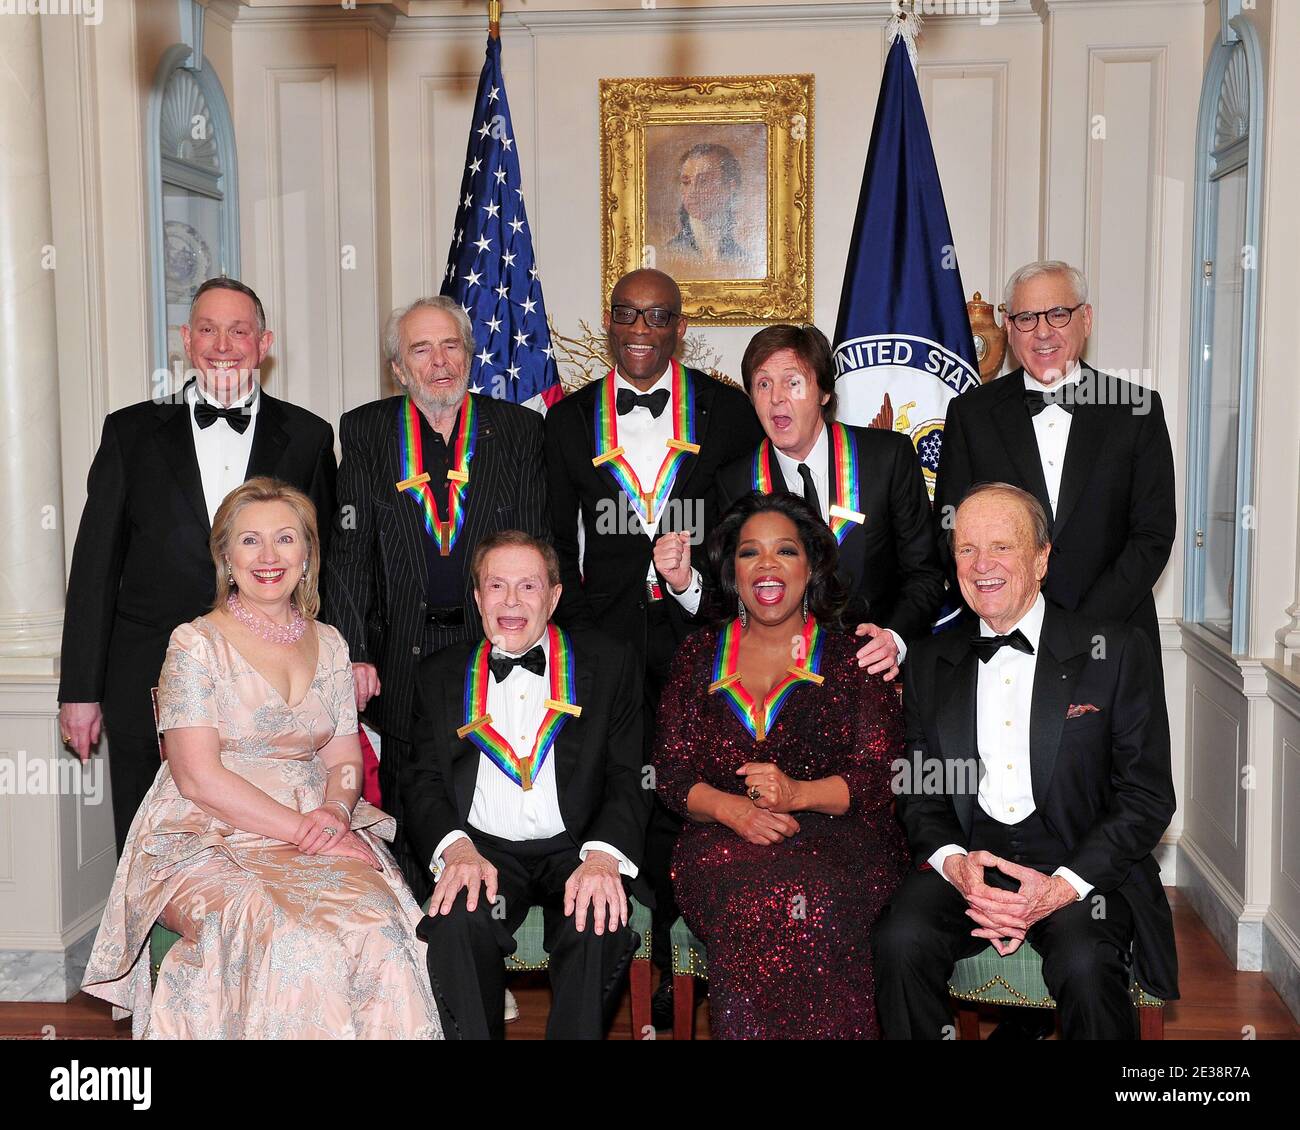 The 2010 Kennedy Center honorees (Top row, L-R) Michael M. Kaiser, President, John F. Kennedy Center for the Performing Arts; Merle Haggard; Bill T. Jones; Sir Paul McCartney; and David M. Rubenstein, Chairman, John F. Kennedy Center for the Performing Arts, (Bottom, L-R) United States Secretary of State Hillary Rodham Clinton; Jerry Herman; Oprah Winfrey; and George Stevens, Jr.pose for their formal class photo following the formal Artist's Dinner at the United States Department of State in Washington, D.C., USA on Saturday, December 4, 2010. Photo By Ron Sachs/ABACAPRESS.COM Stock Photo